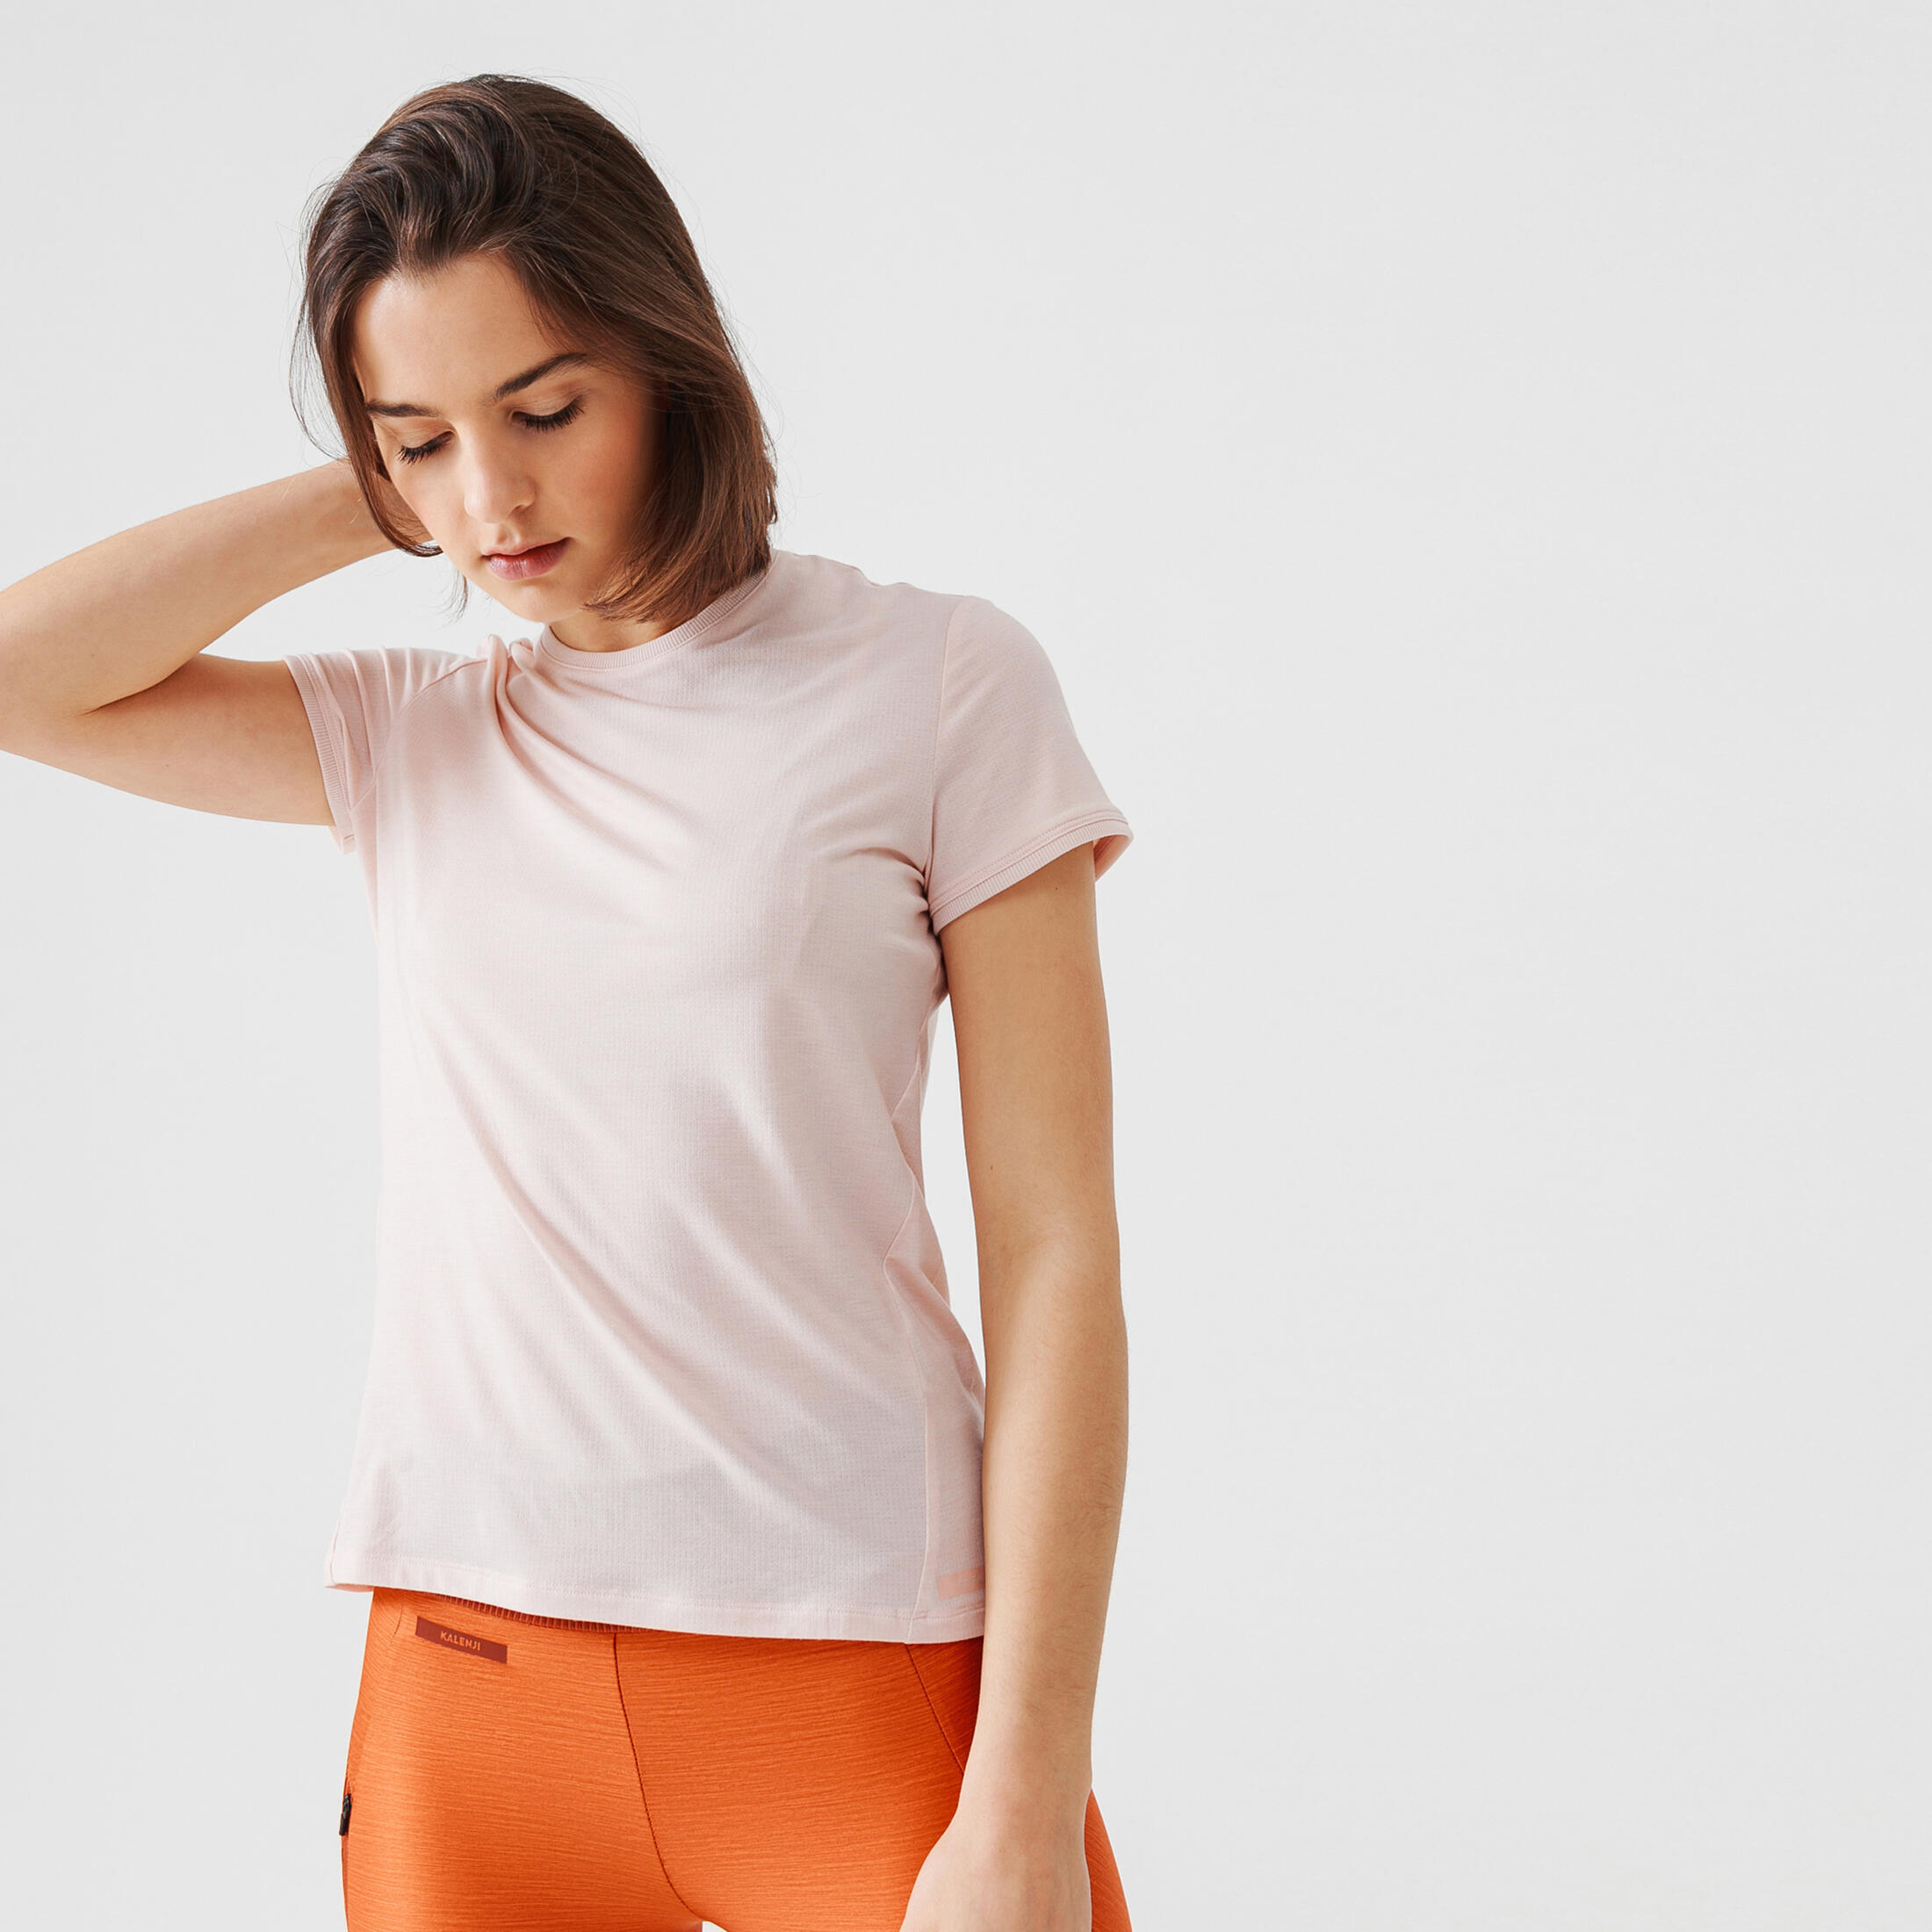 Soft and breathable women's running T-shirt - pink 1/8